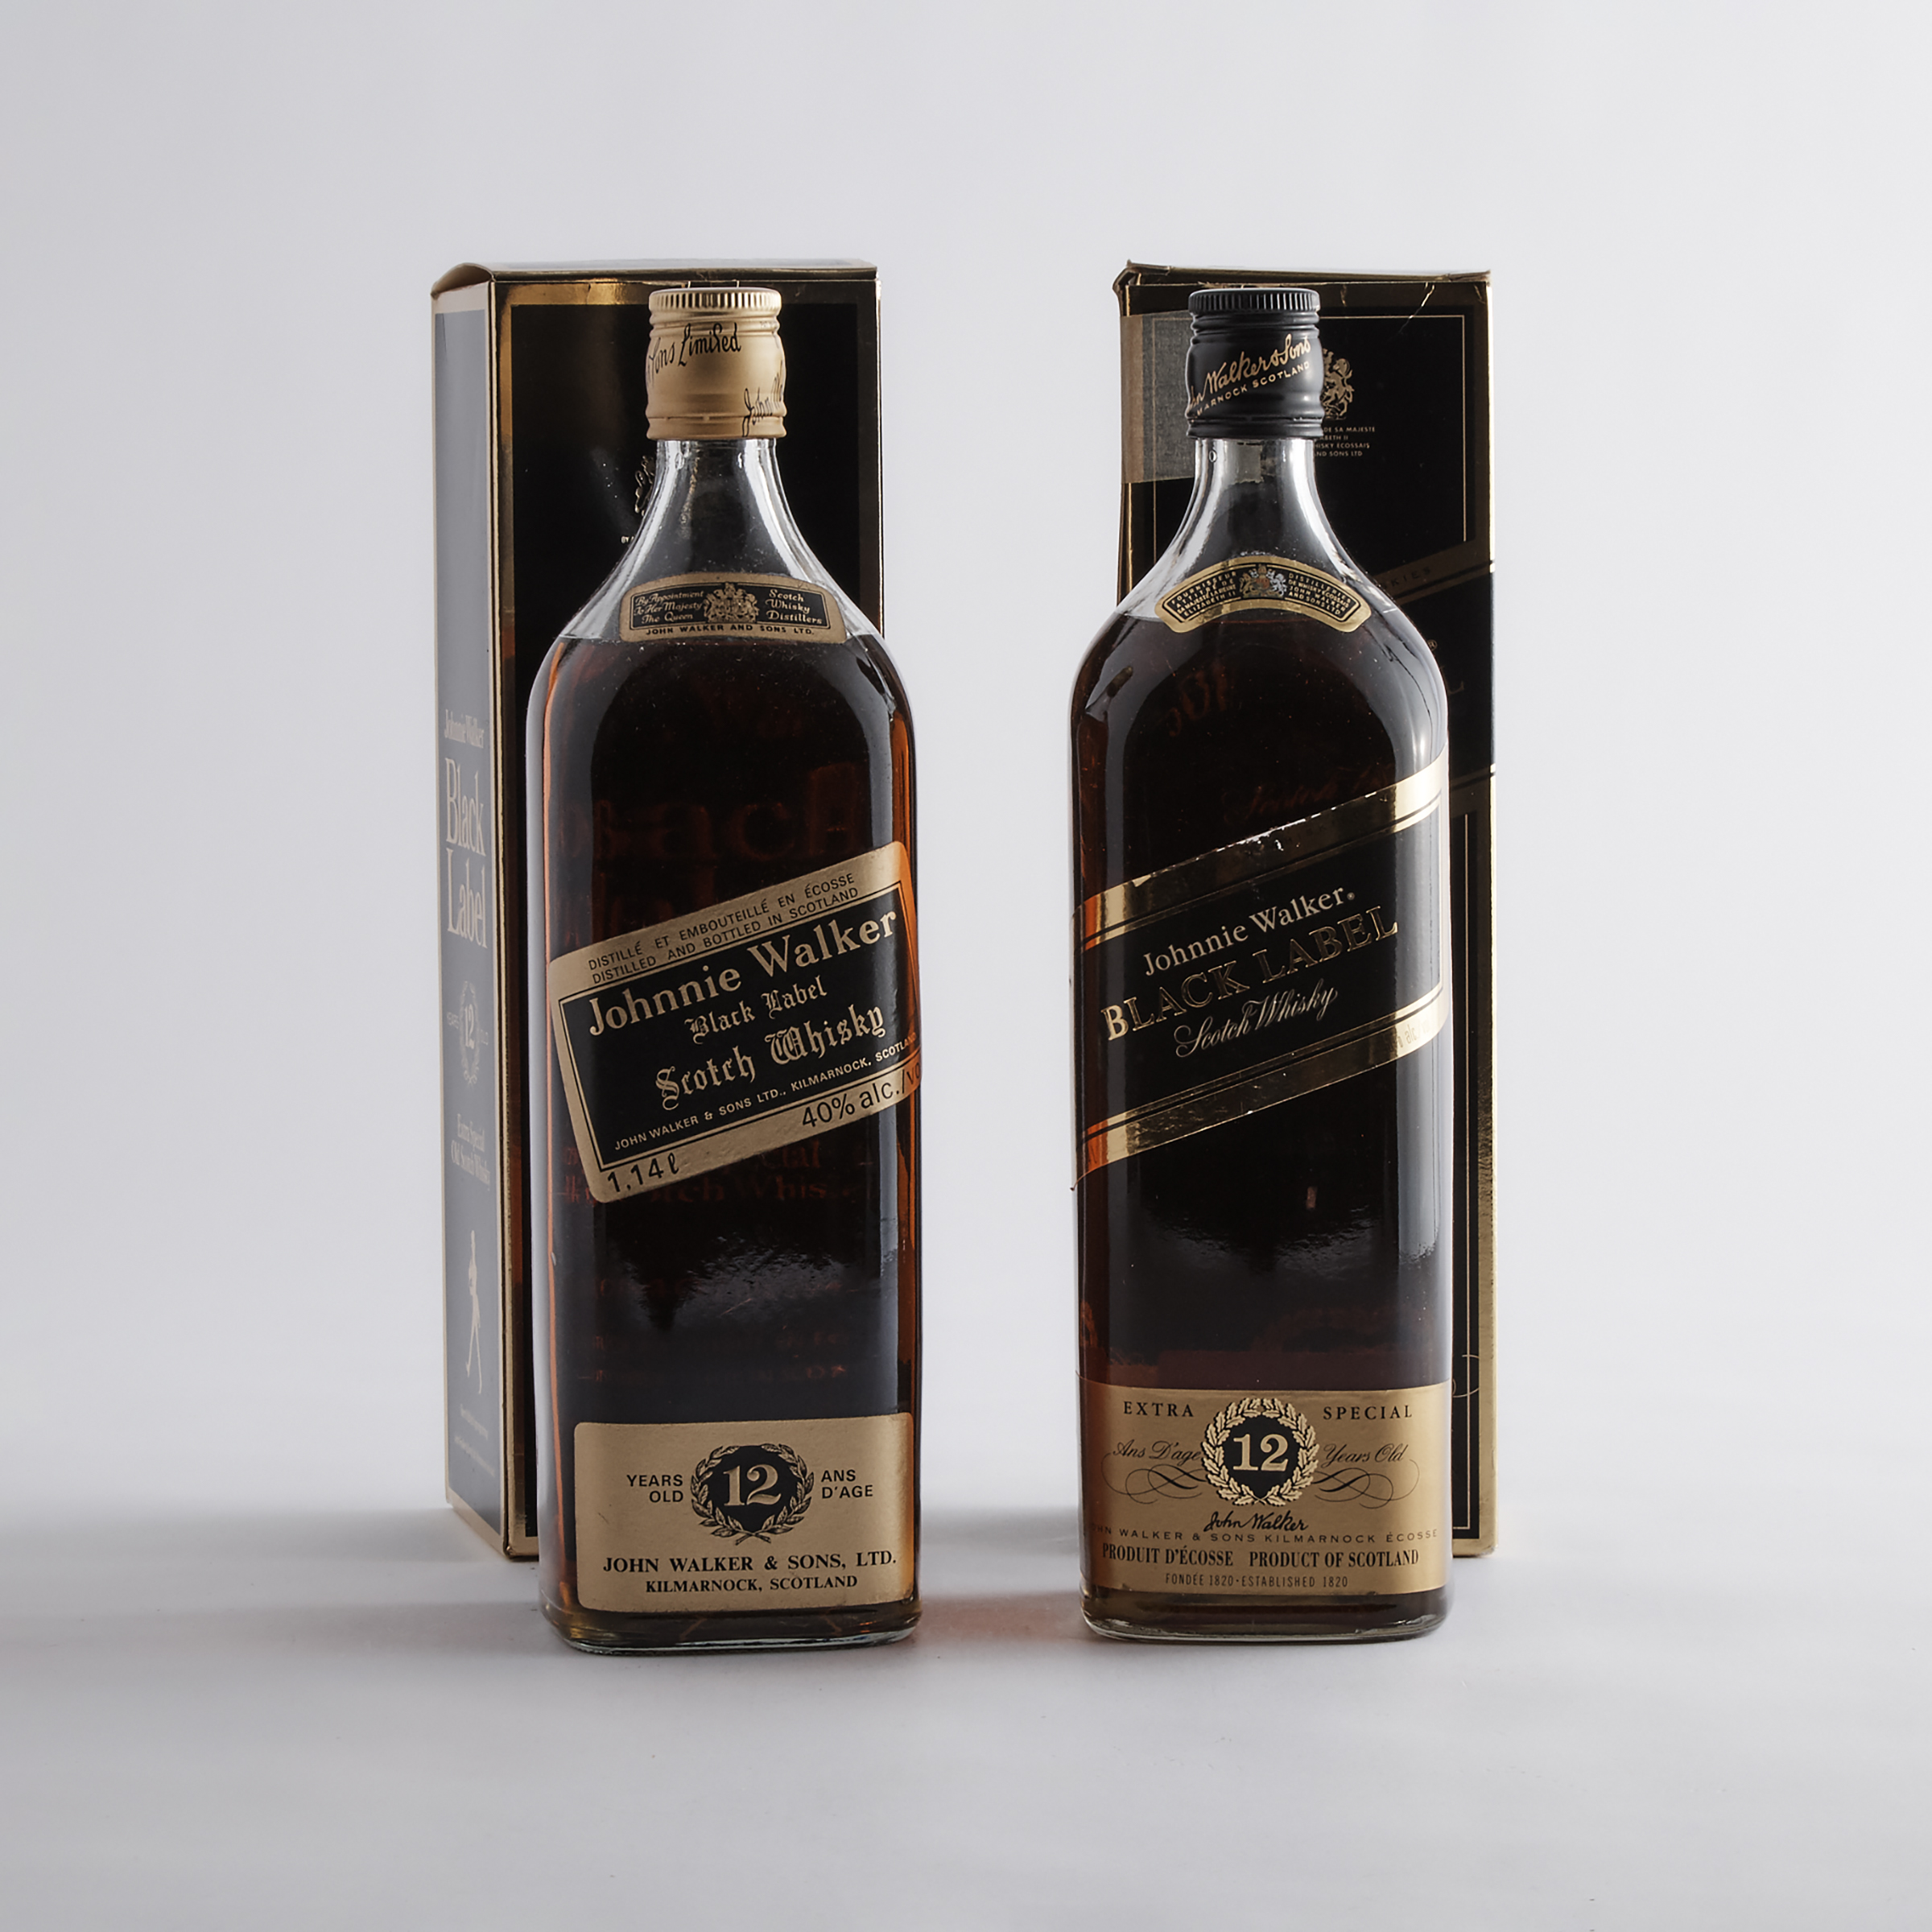 JOHNNIE WALKER BLACK LABEL EXTRA SPECIAL BLENDED SCOTCH WHISKY 12 YEARS (ONE 1.14 L)
JOHNNIE WALKER BLACK LABEL EXTRA SPECIAL BLENDED SCOTCH WHISKY 12 YEARS (ONE 1.14 L)